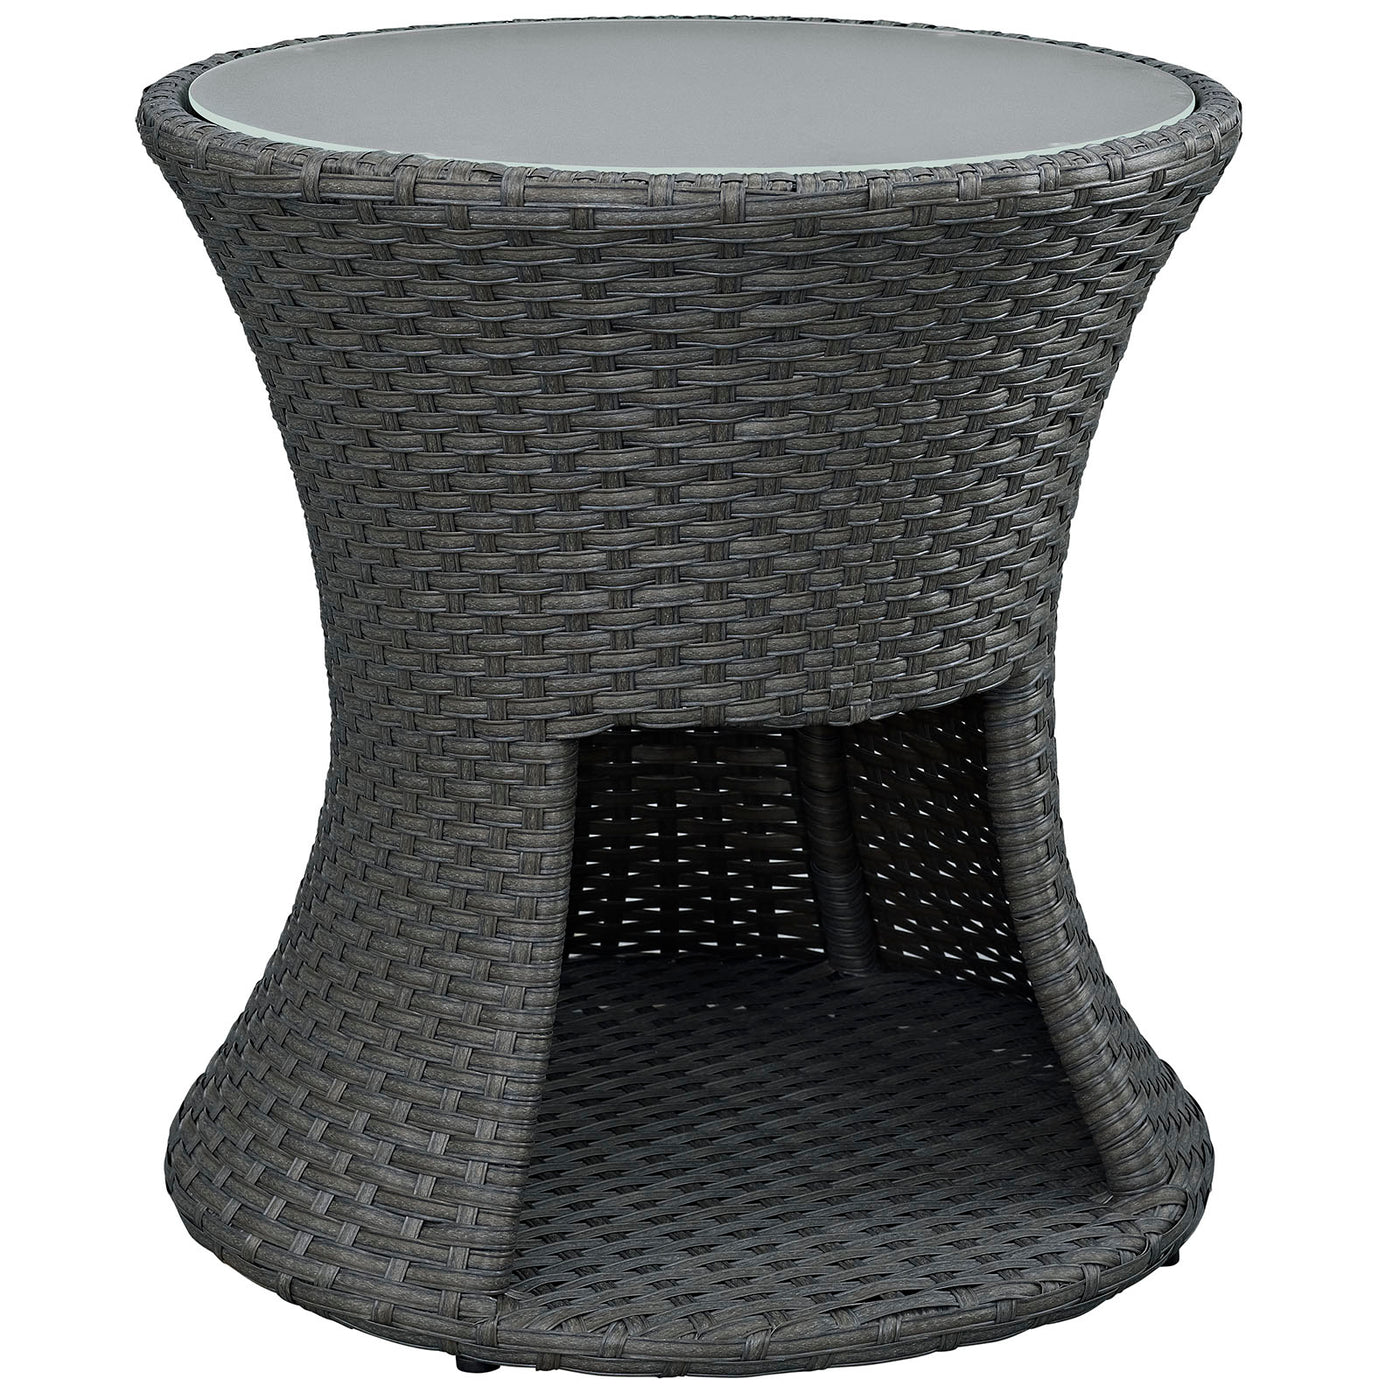 Sojourn Round Outdoor Patio Side Table